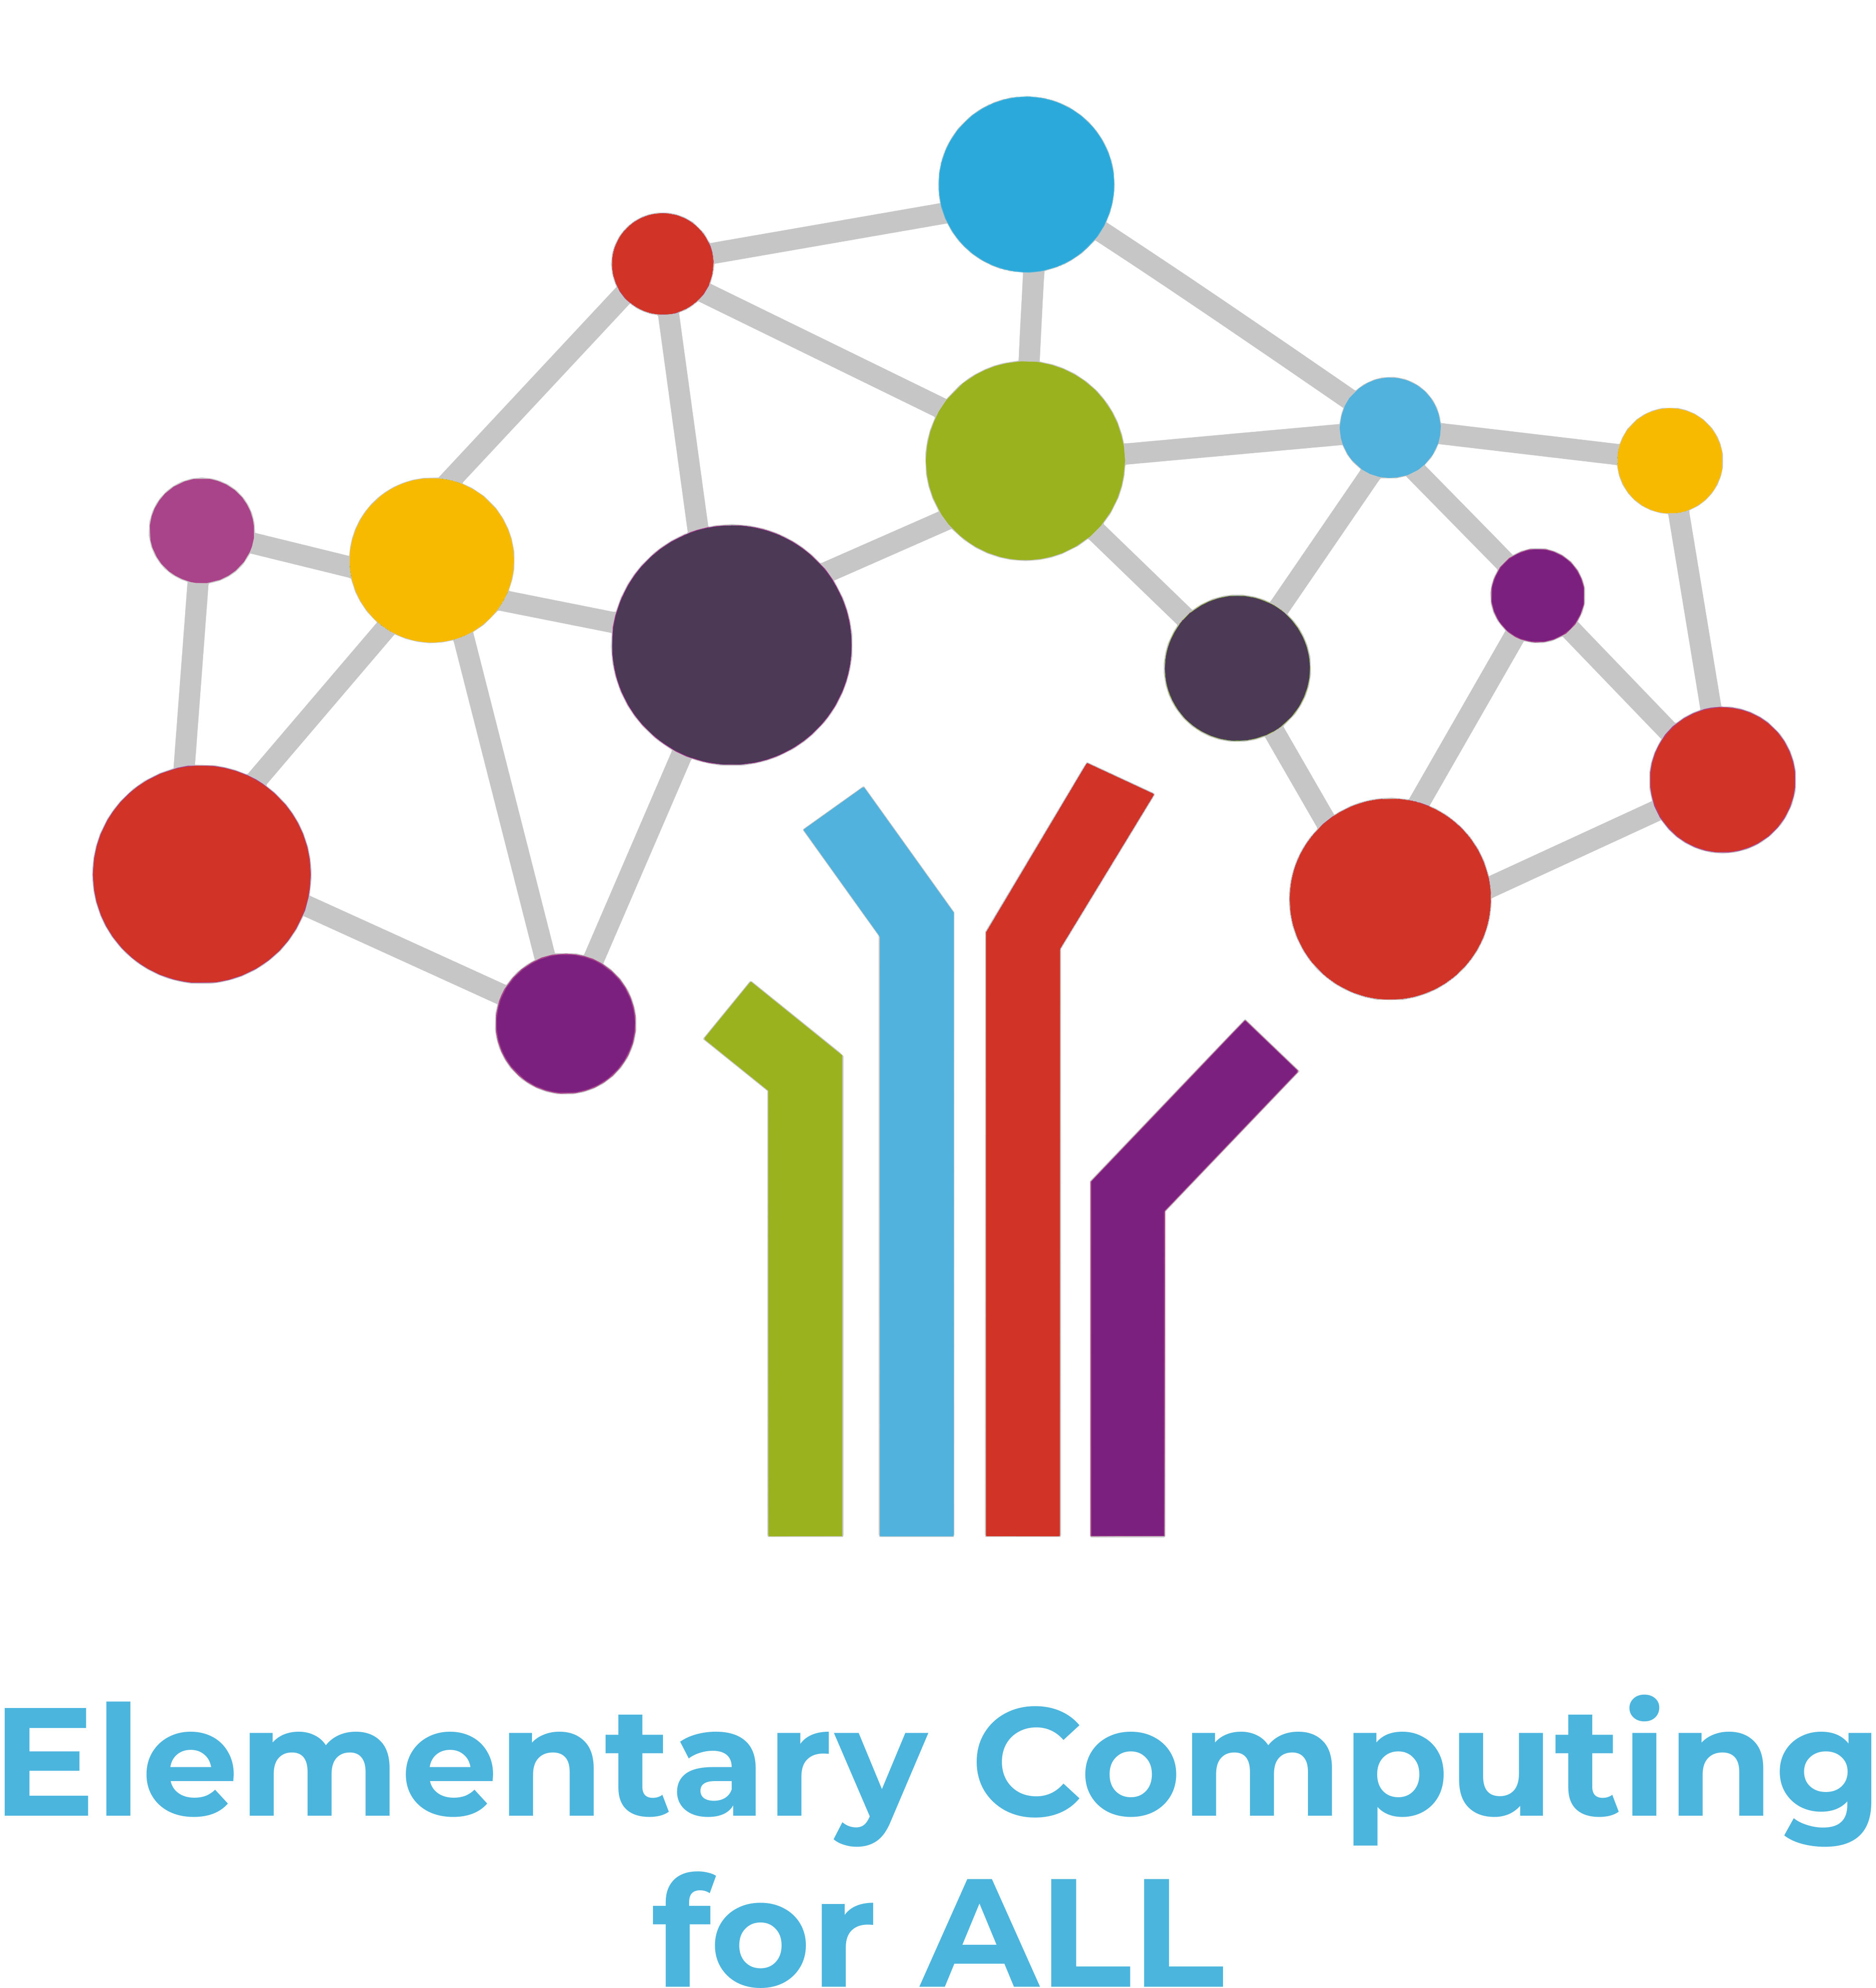 Elementary Computing for ALL